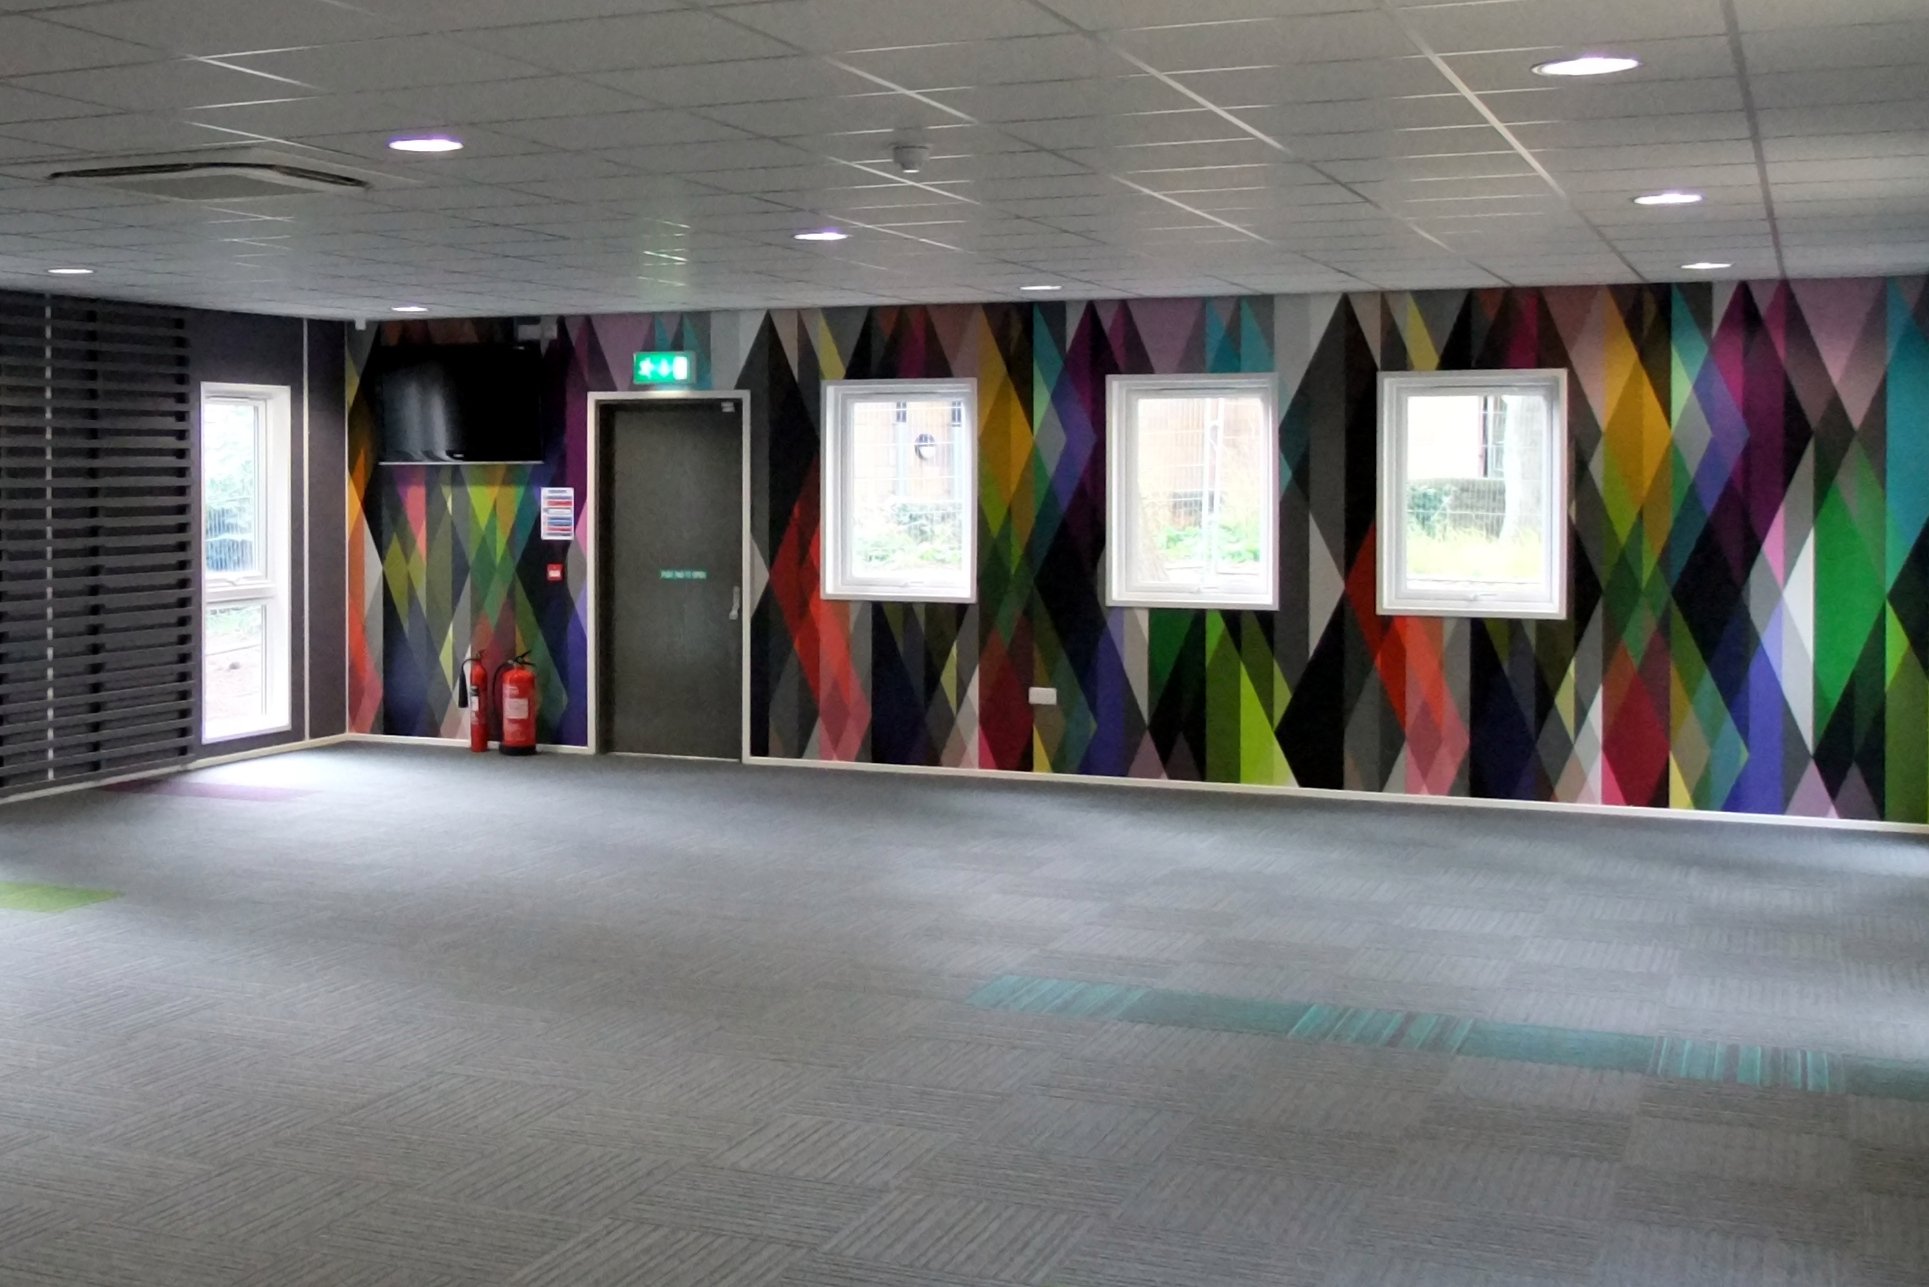 Image shows a large empty room with a multi-coloured feature wall which is made up of gemoetric shapes. The ceiling is made of ceiling tiles and there's a grey carpet covering the floor. There's 3 waist-height windows on the far wall and a floor-to-ceiling window on the far left shocasing the amount of light coming in. This was a modular built room made by Elite Systems for Sheffield Hallam University